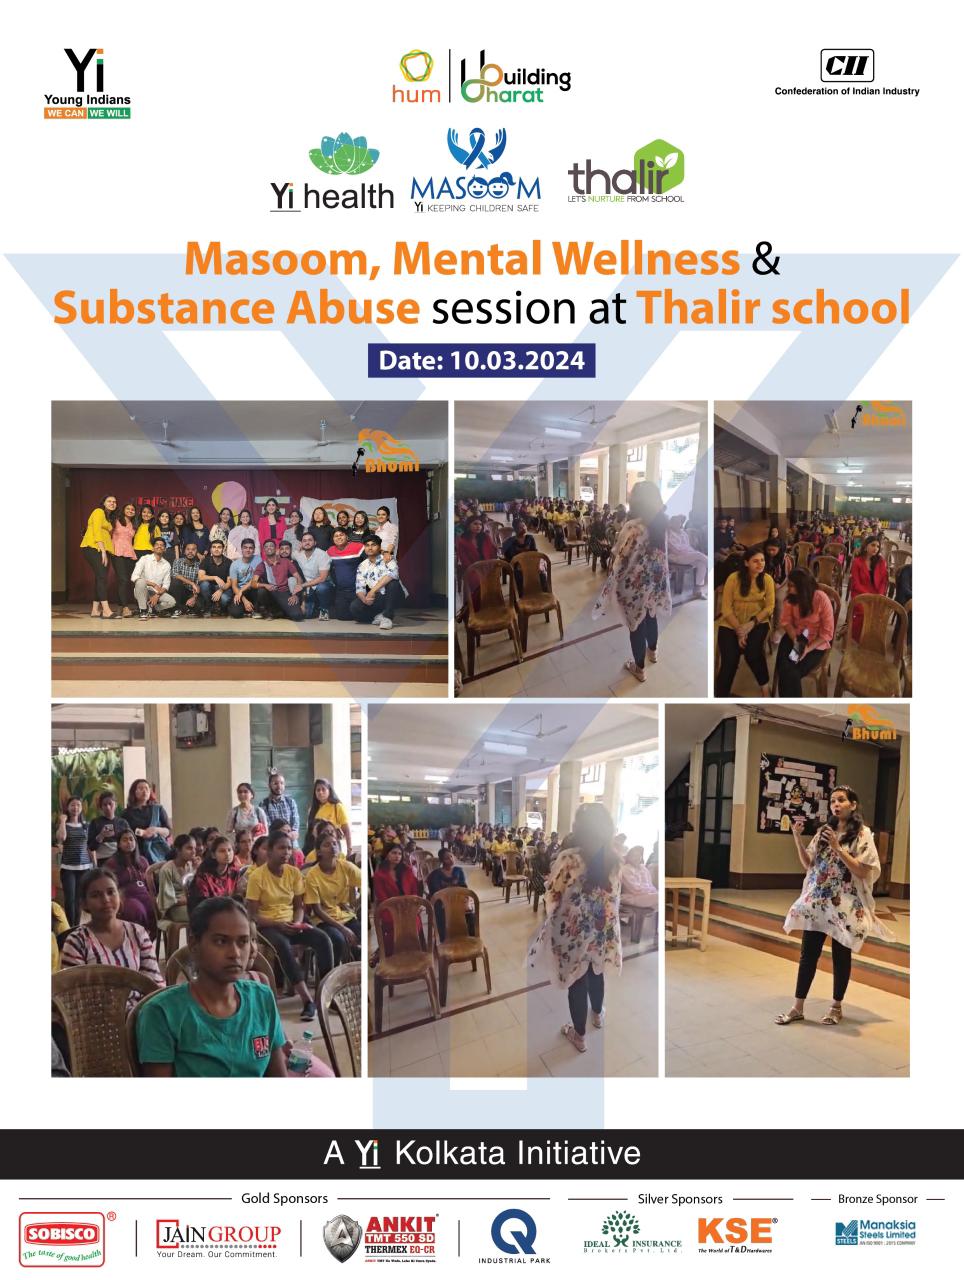 Yi24 | Mental Wellness & Substance Abuse Session